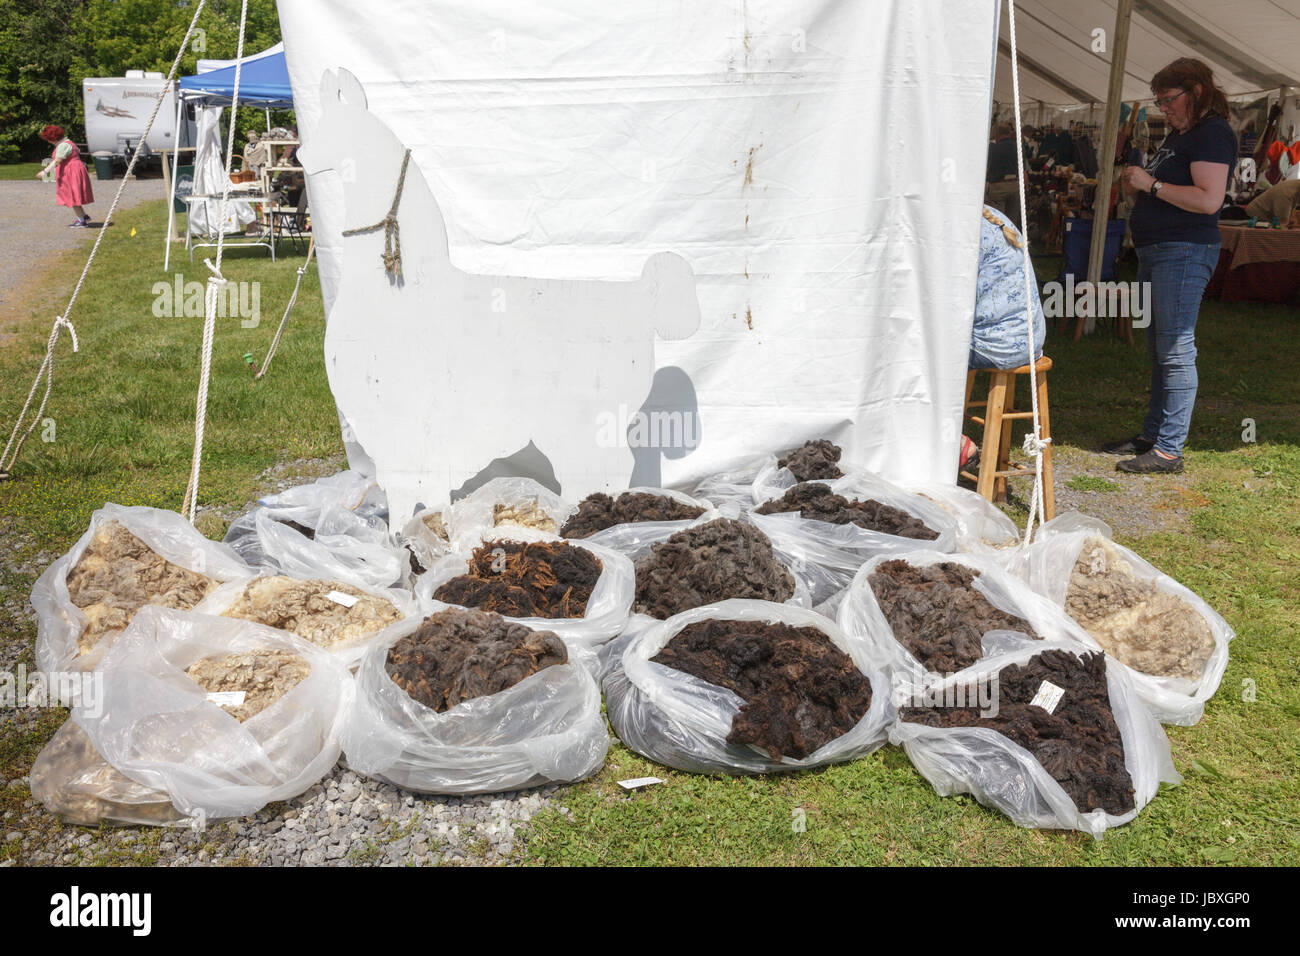 BOUCKVILLE, NY, USA - JUNE 10 2017: Bags of nwool for sale at the annual Fiber Festival of Central New York. Stock Photo